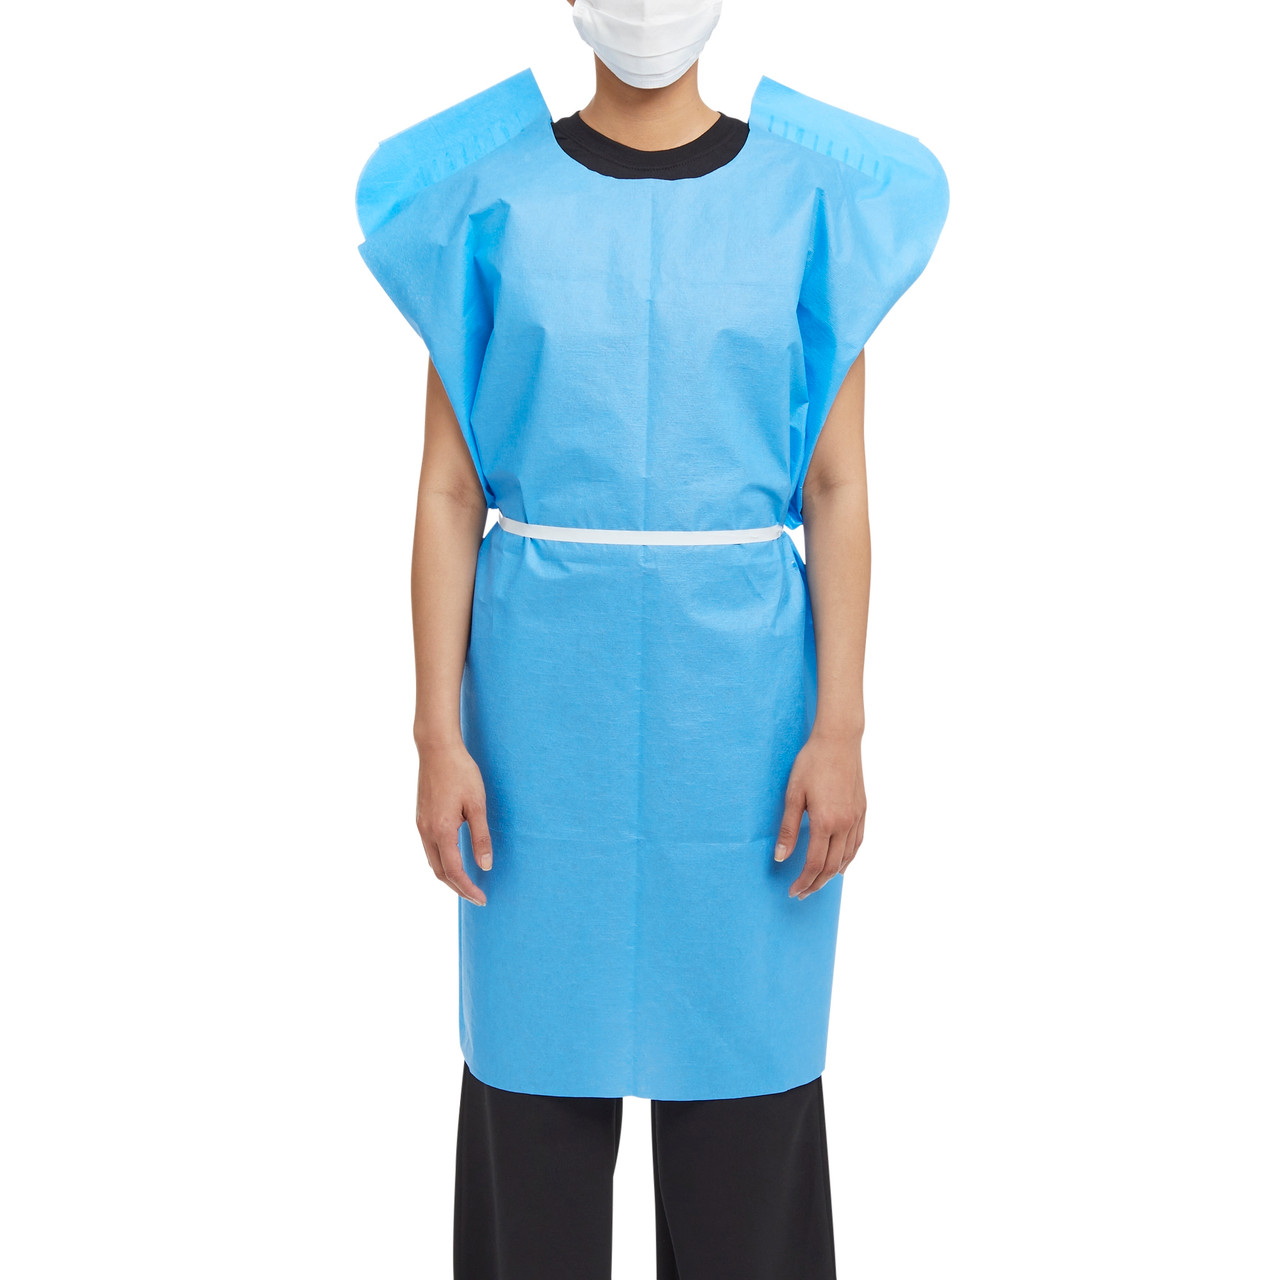 Medical Patient Gowns | Made in the USA, Ships Fast, In Stock